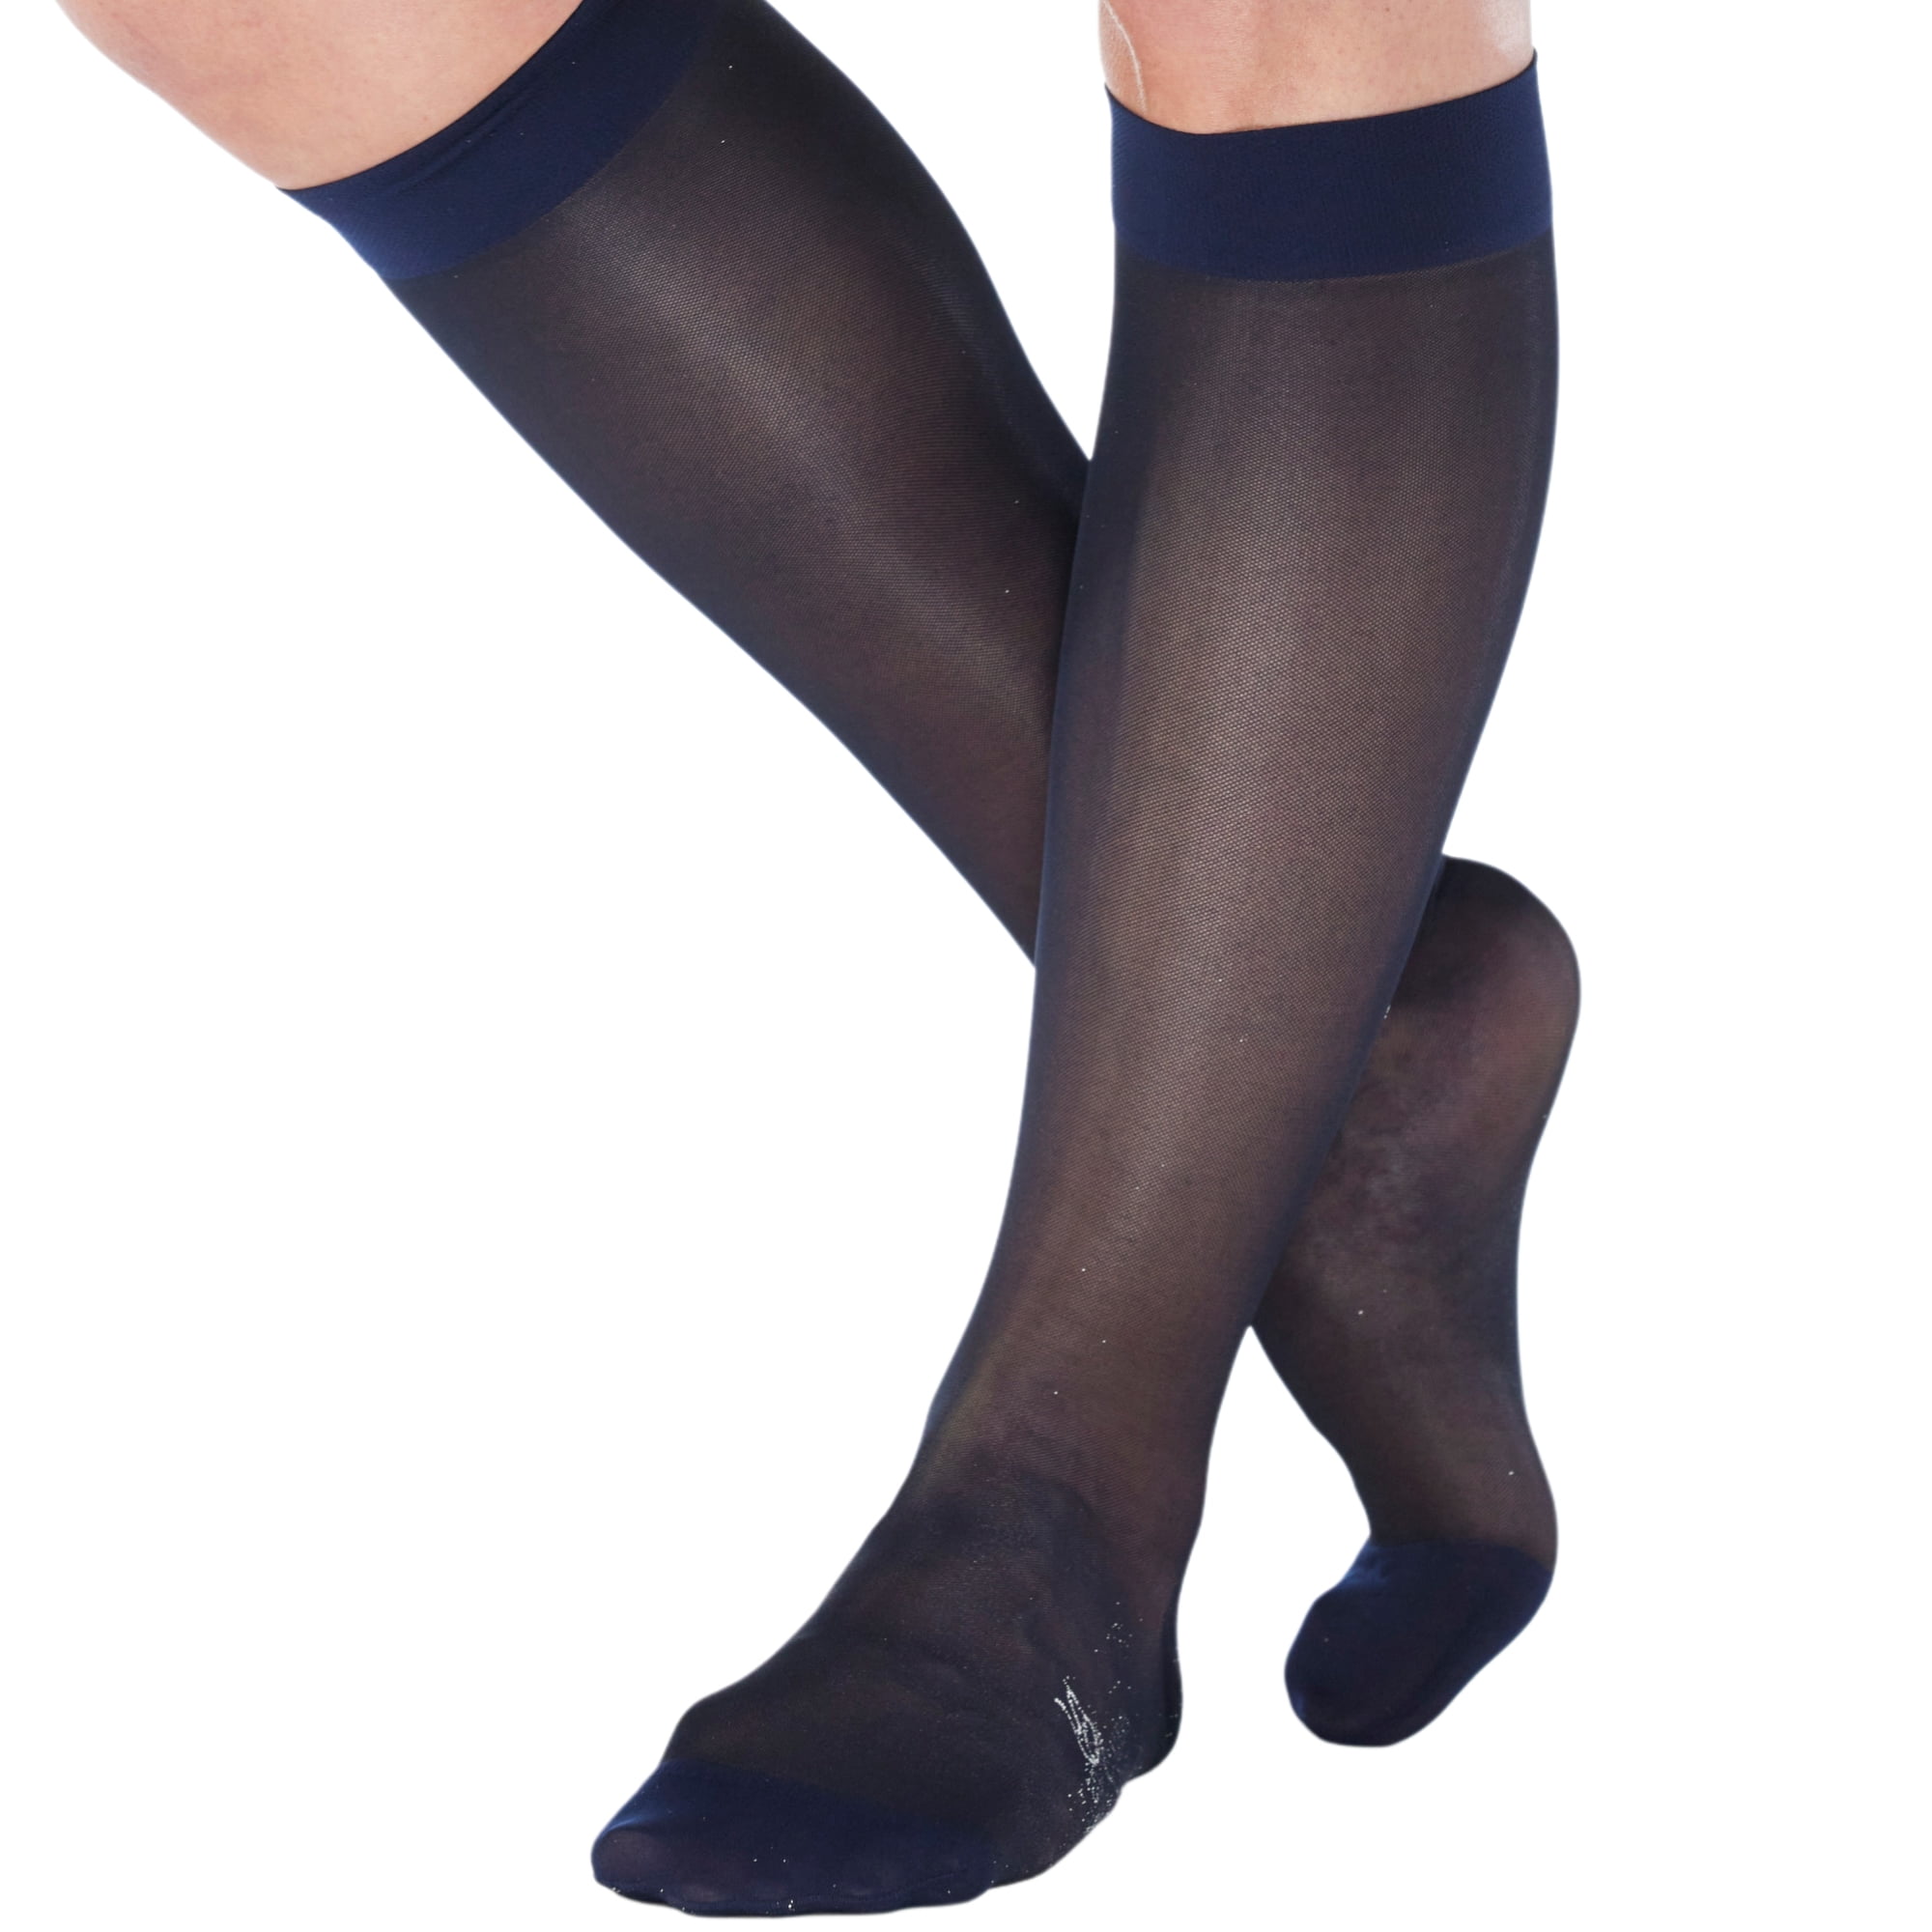 Womens Compression Stockings 15-20mmHg by Absolute Support - Navy ...